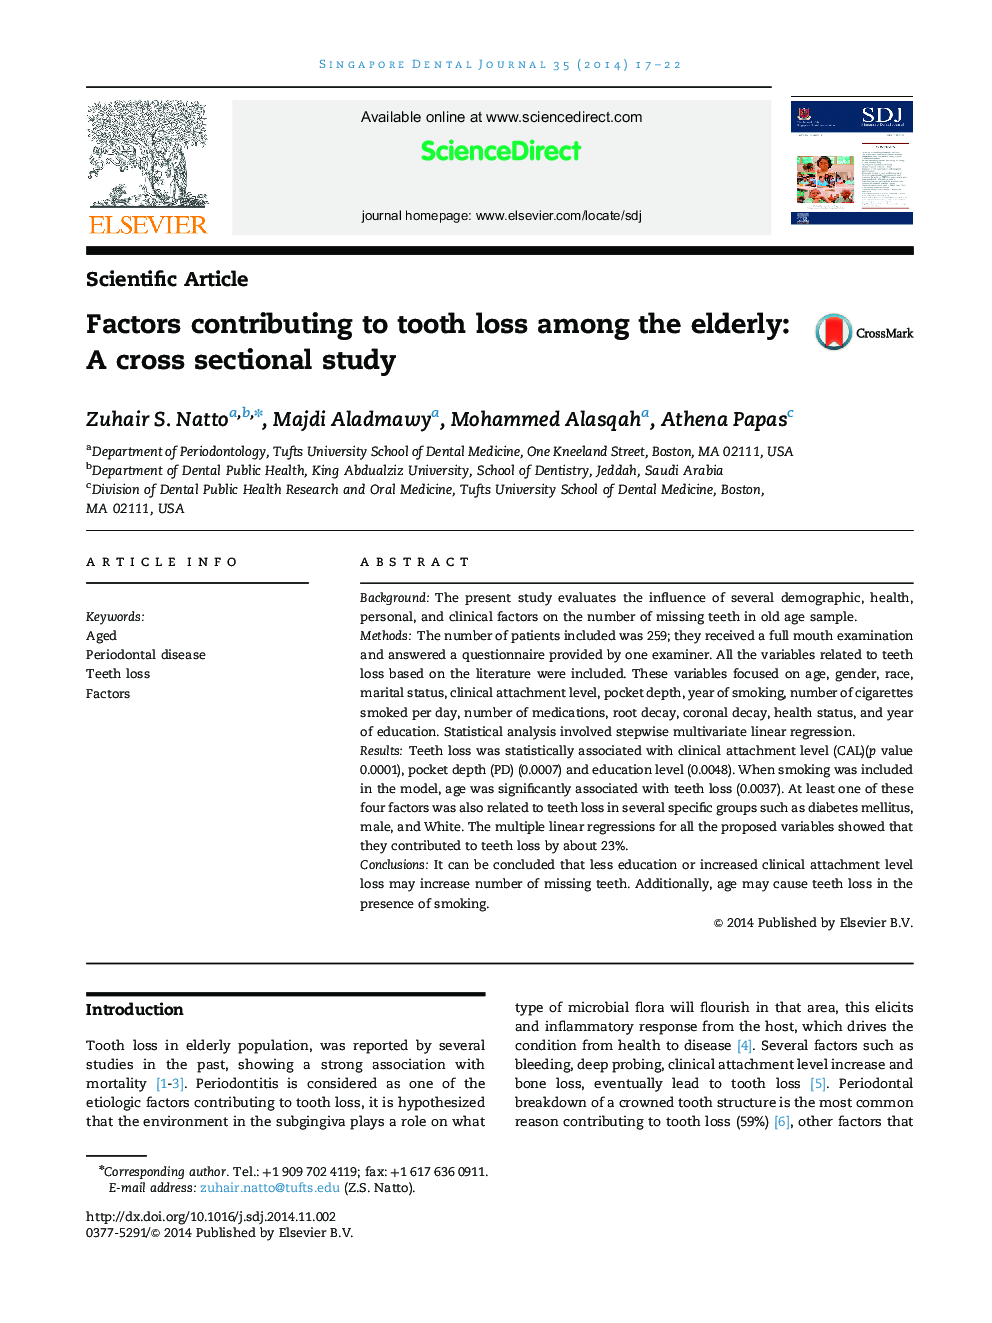 Factors contributing to tooth loss among the elderly: A cross sectional study